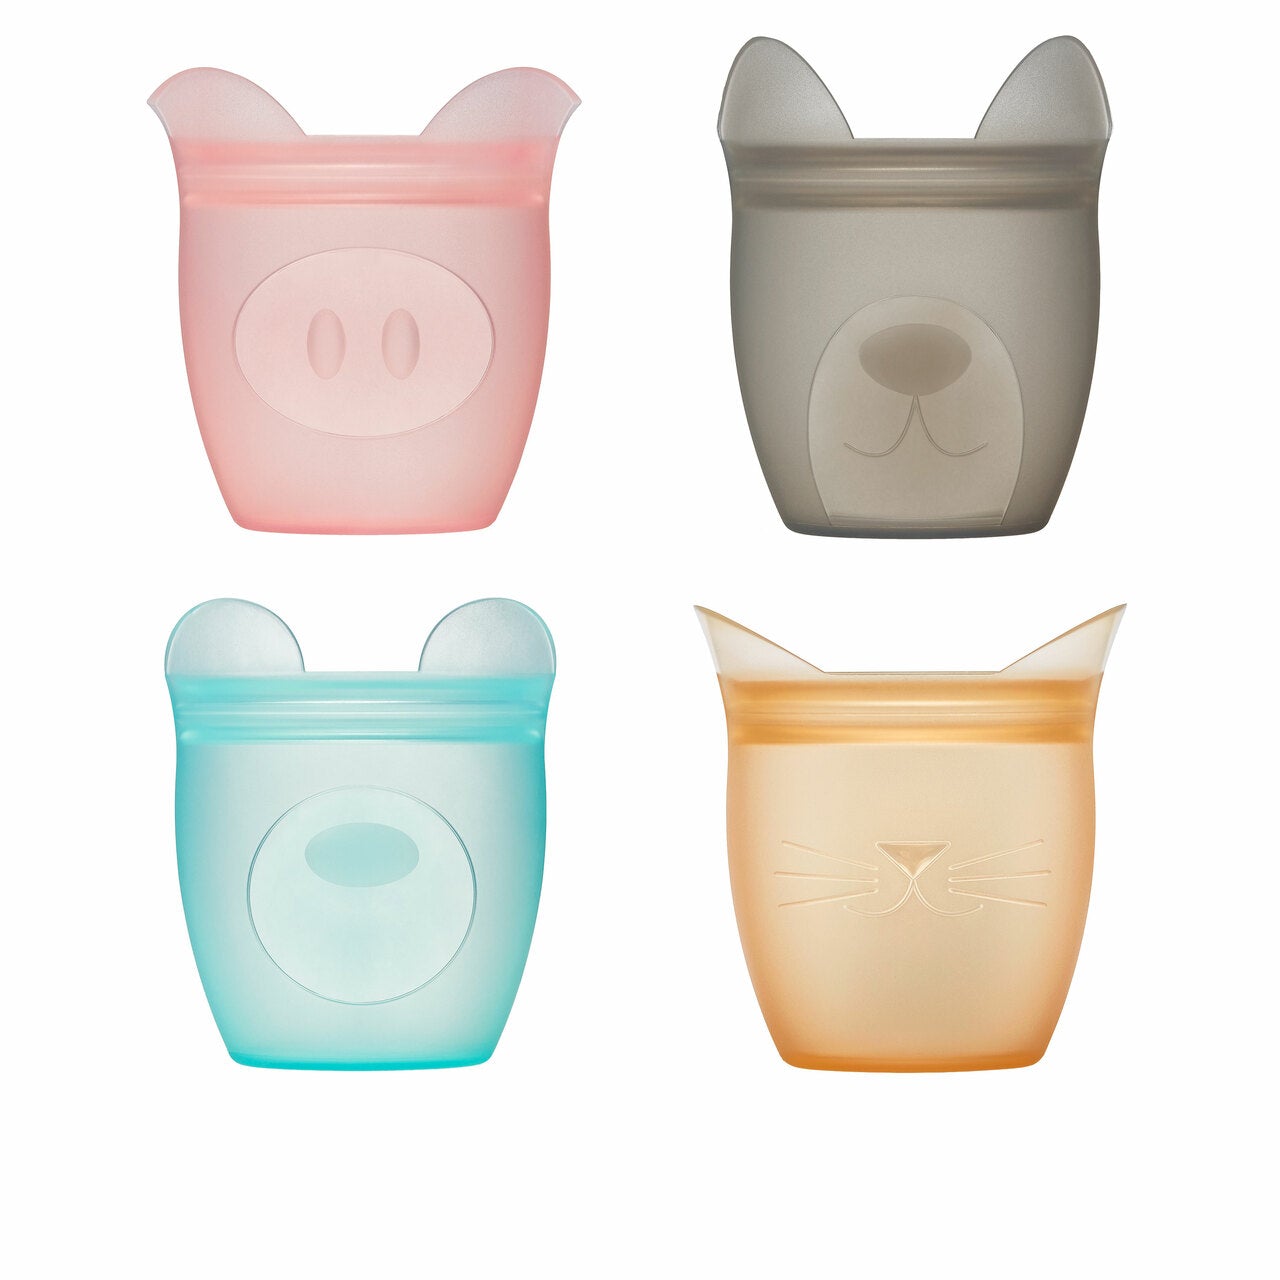 Zip Top Reusable Baby + Kid Snack Containers 100% Silicone, Set of 4 - ANB Baby -$20 - $50